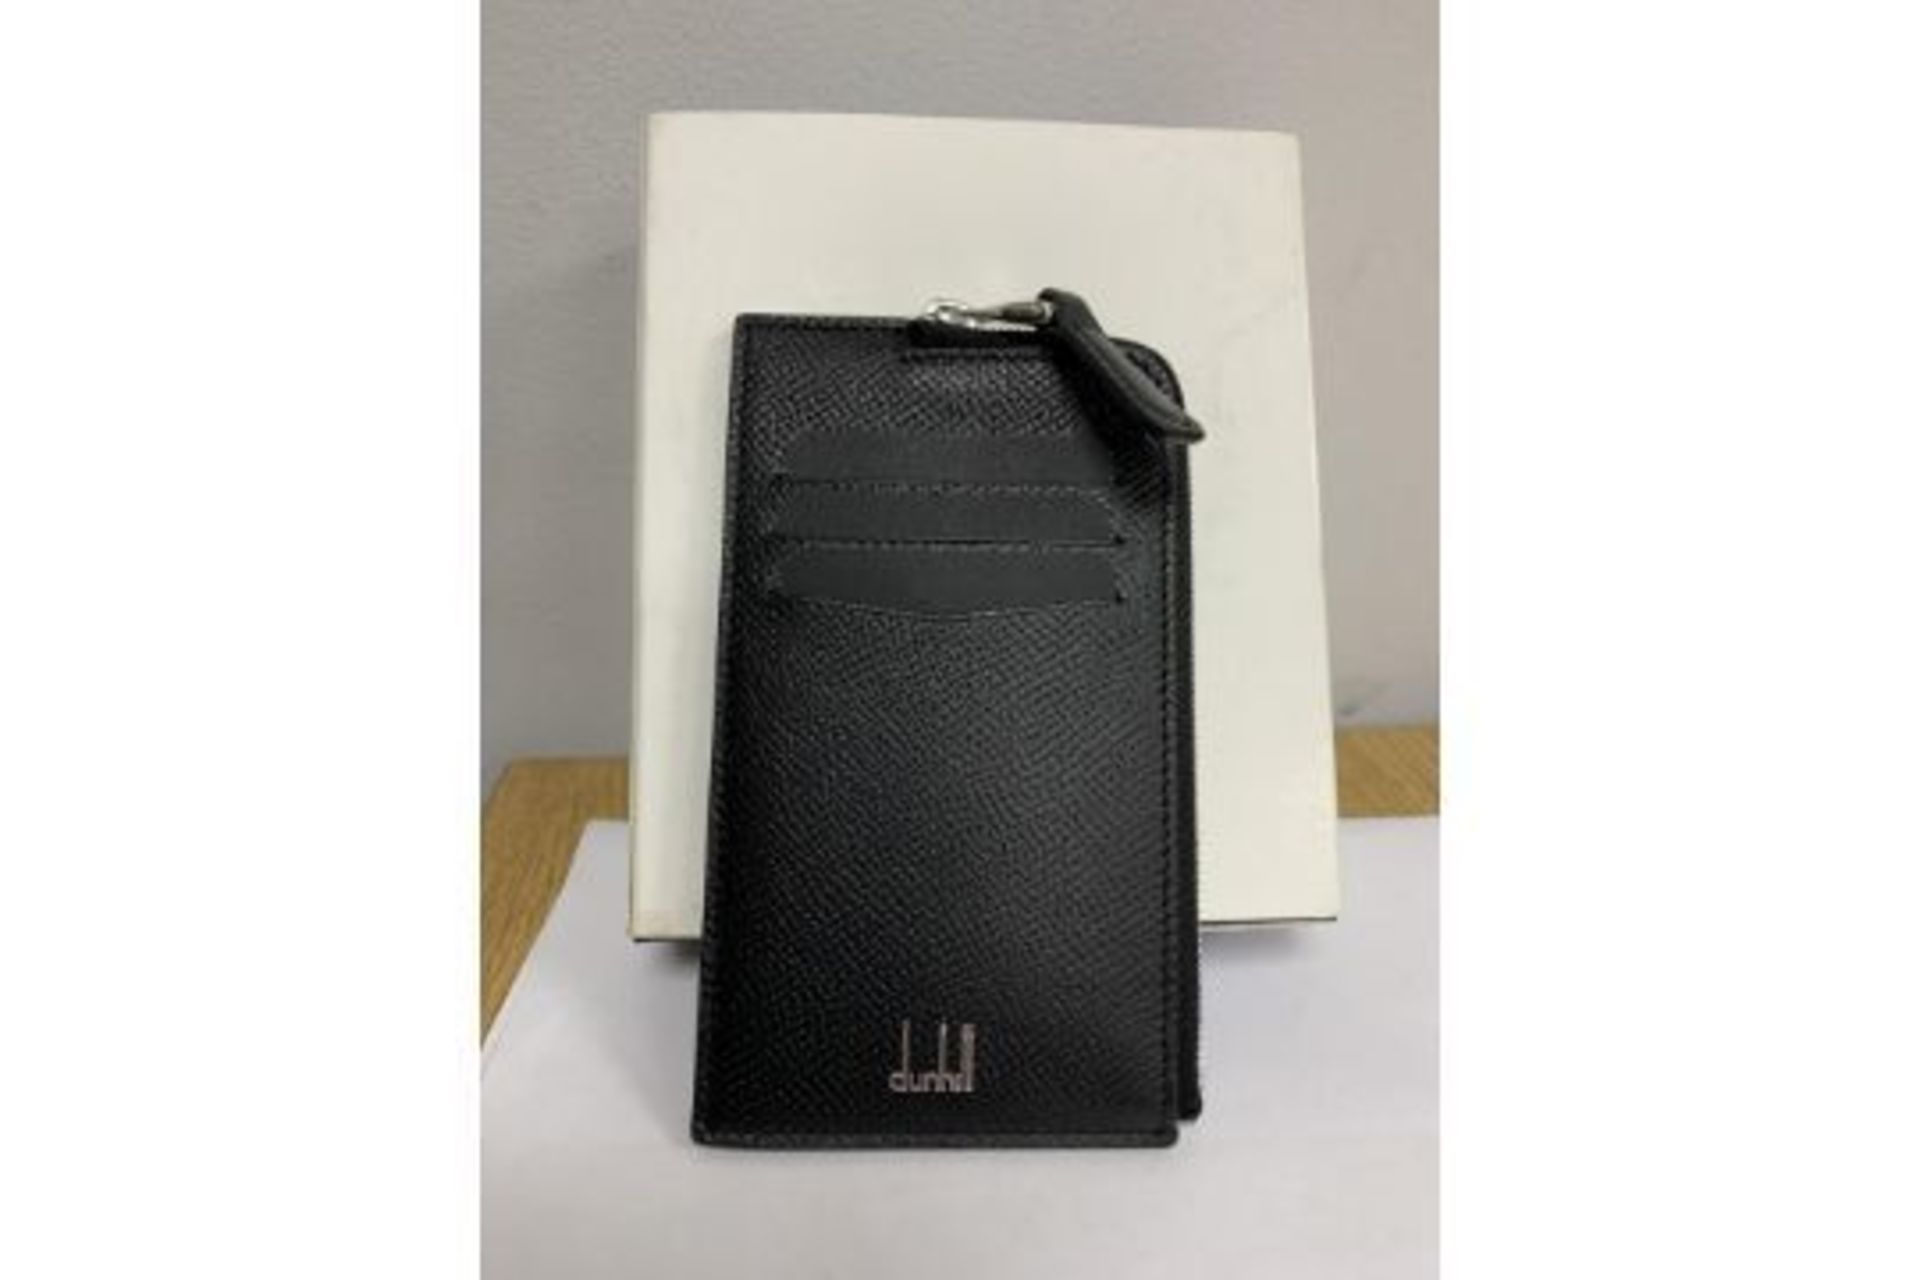 BRAND NEW ALFRED DUNHILL BLACK CADOGAN ZIP CARD CASE (2208) RRP £189 - 1